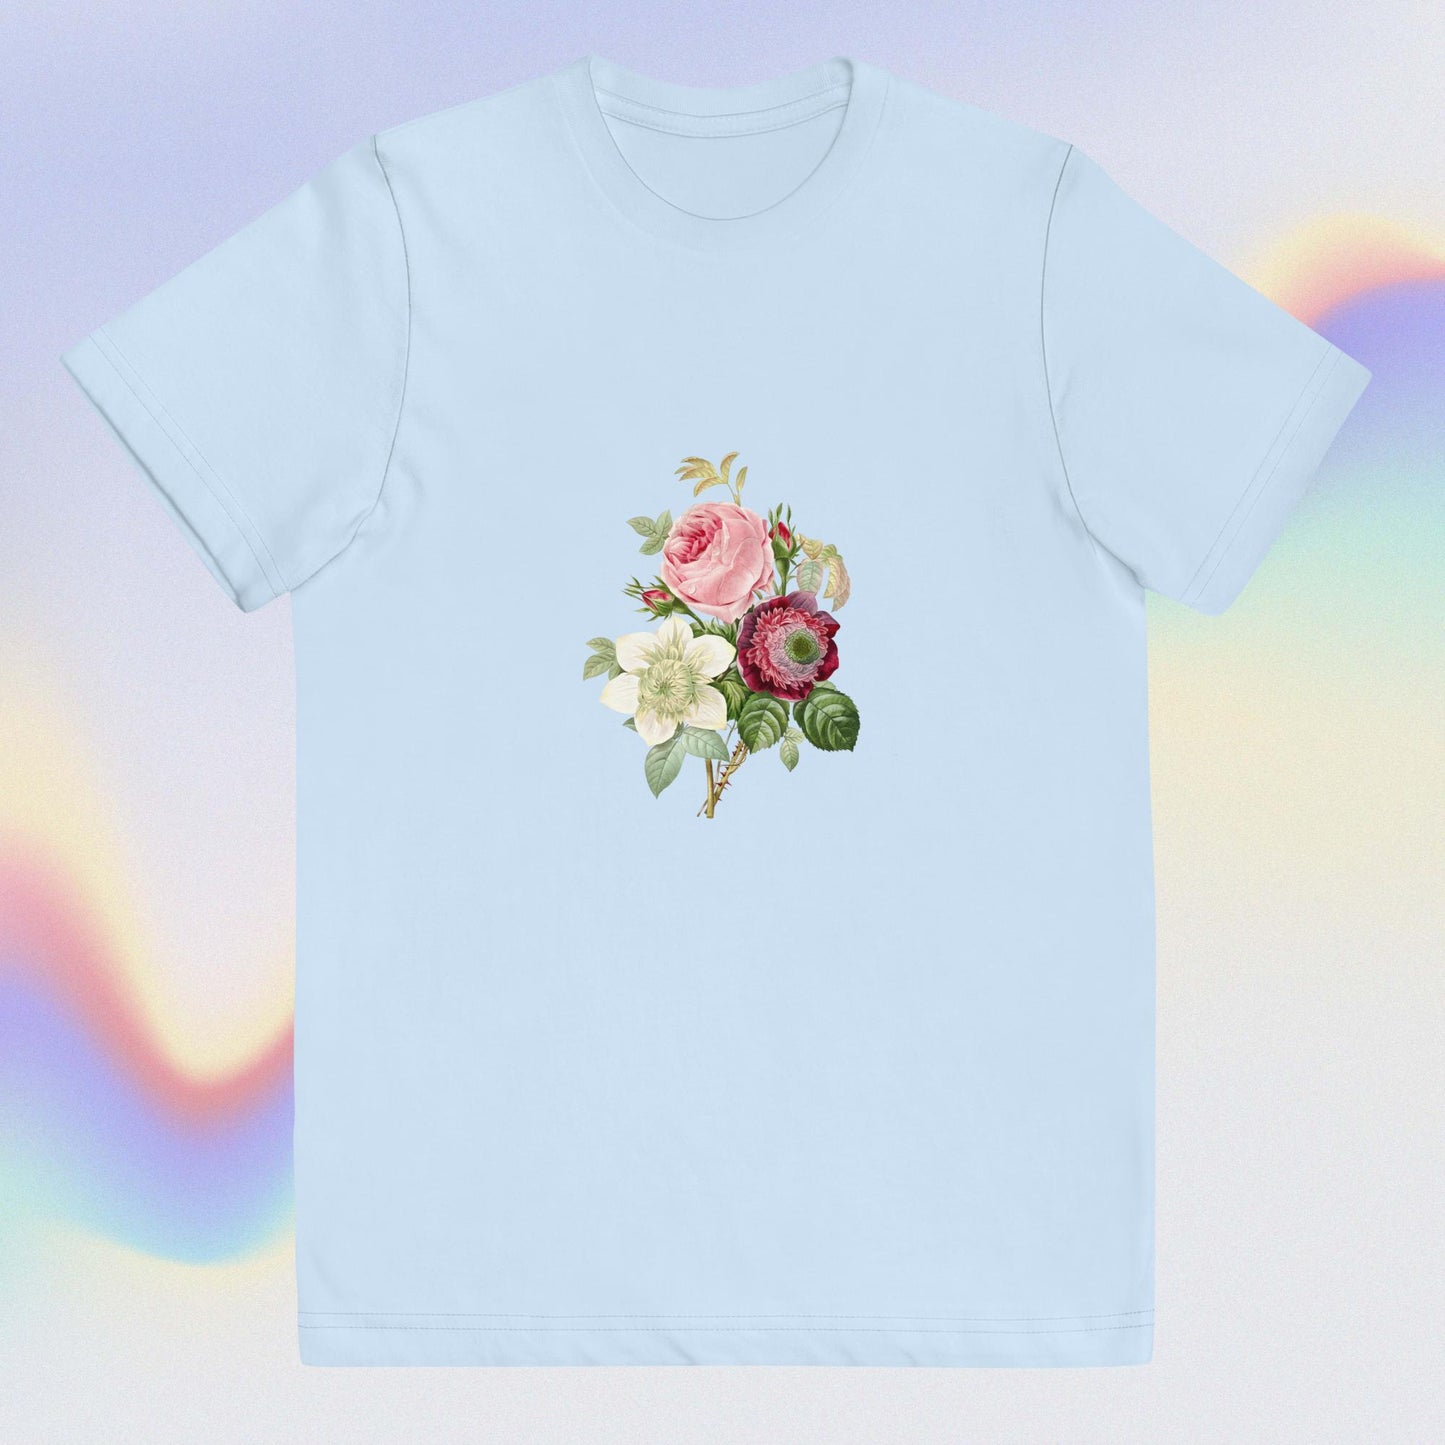 Youth jersey t-shirt flowers pink and white